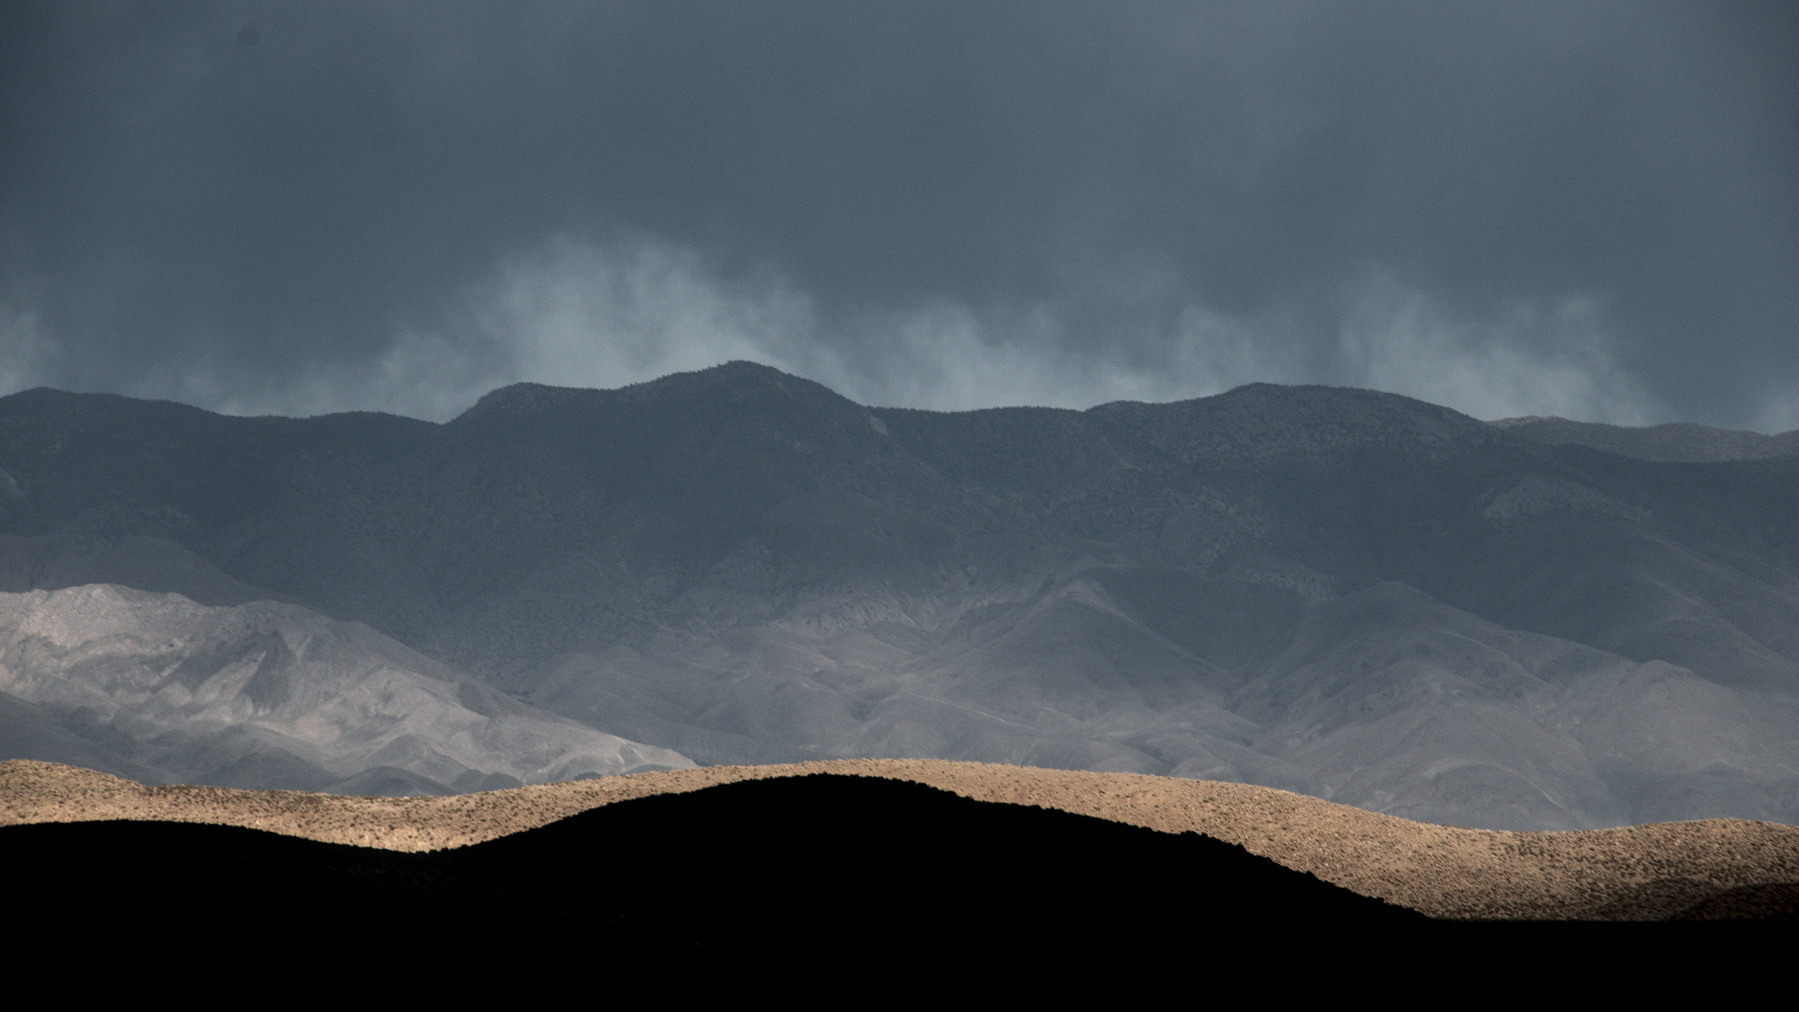 Hills receding to the White Mountains, black shadow in the foreground, blue, grey rain in the background, with a thin line of sage brush lit up golden in the middle.